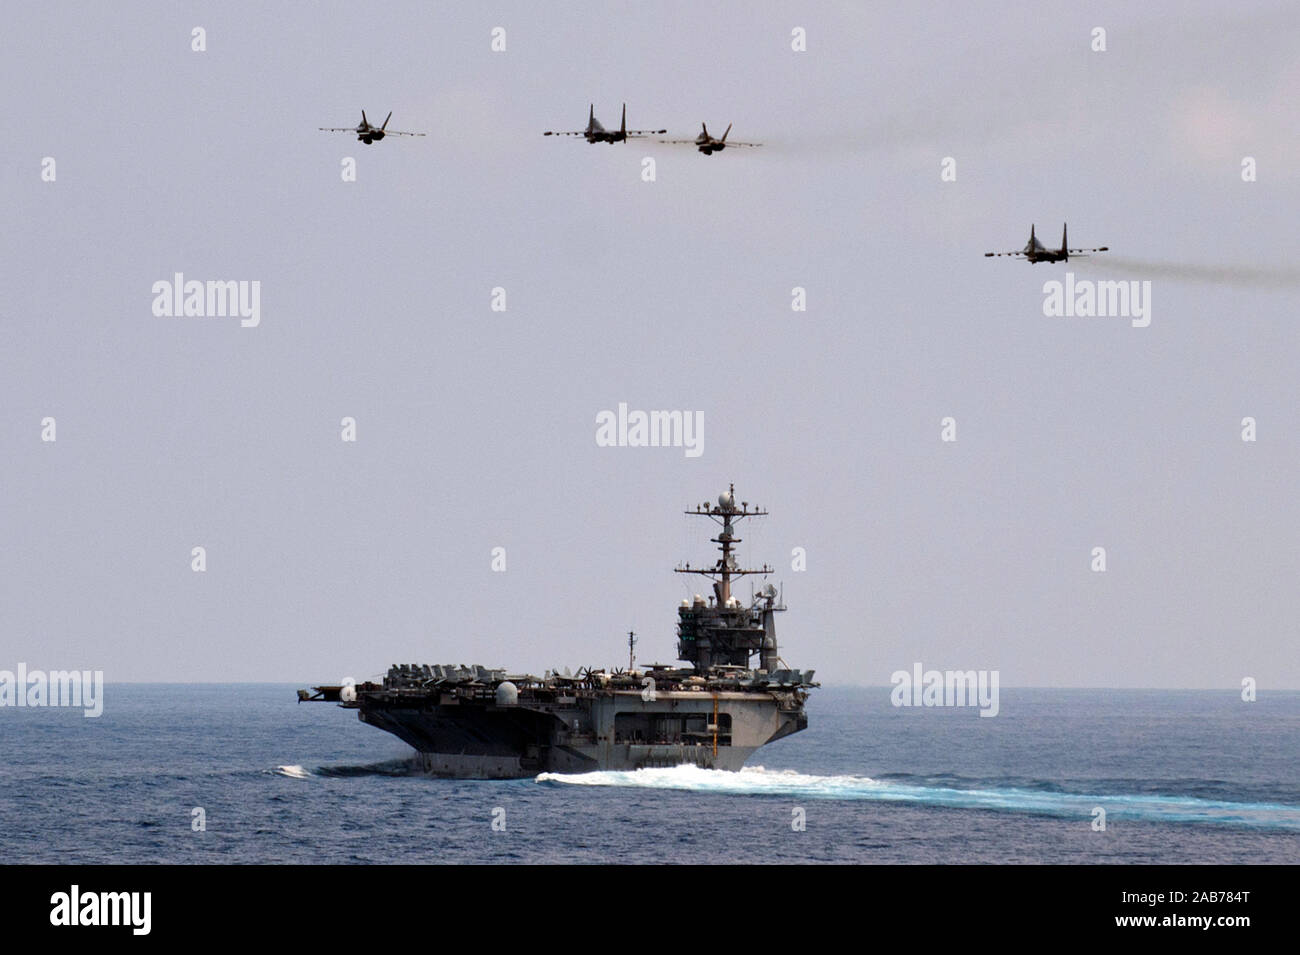 SOUTH CHINA SEA (Oct. 15, 2012) Two F/A-18 Super Hornets from the Royal Maces of Strike Fighter Squadron (VFA) 27 fly in formation with two Royal Malaysian air force Sukhoi Su-30s over the aircraft carrier USS George Washington (CVN 73). Stock Photo